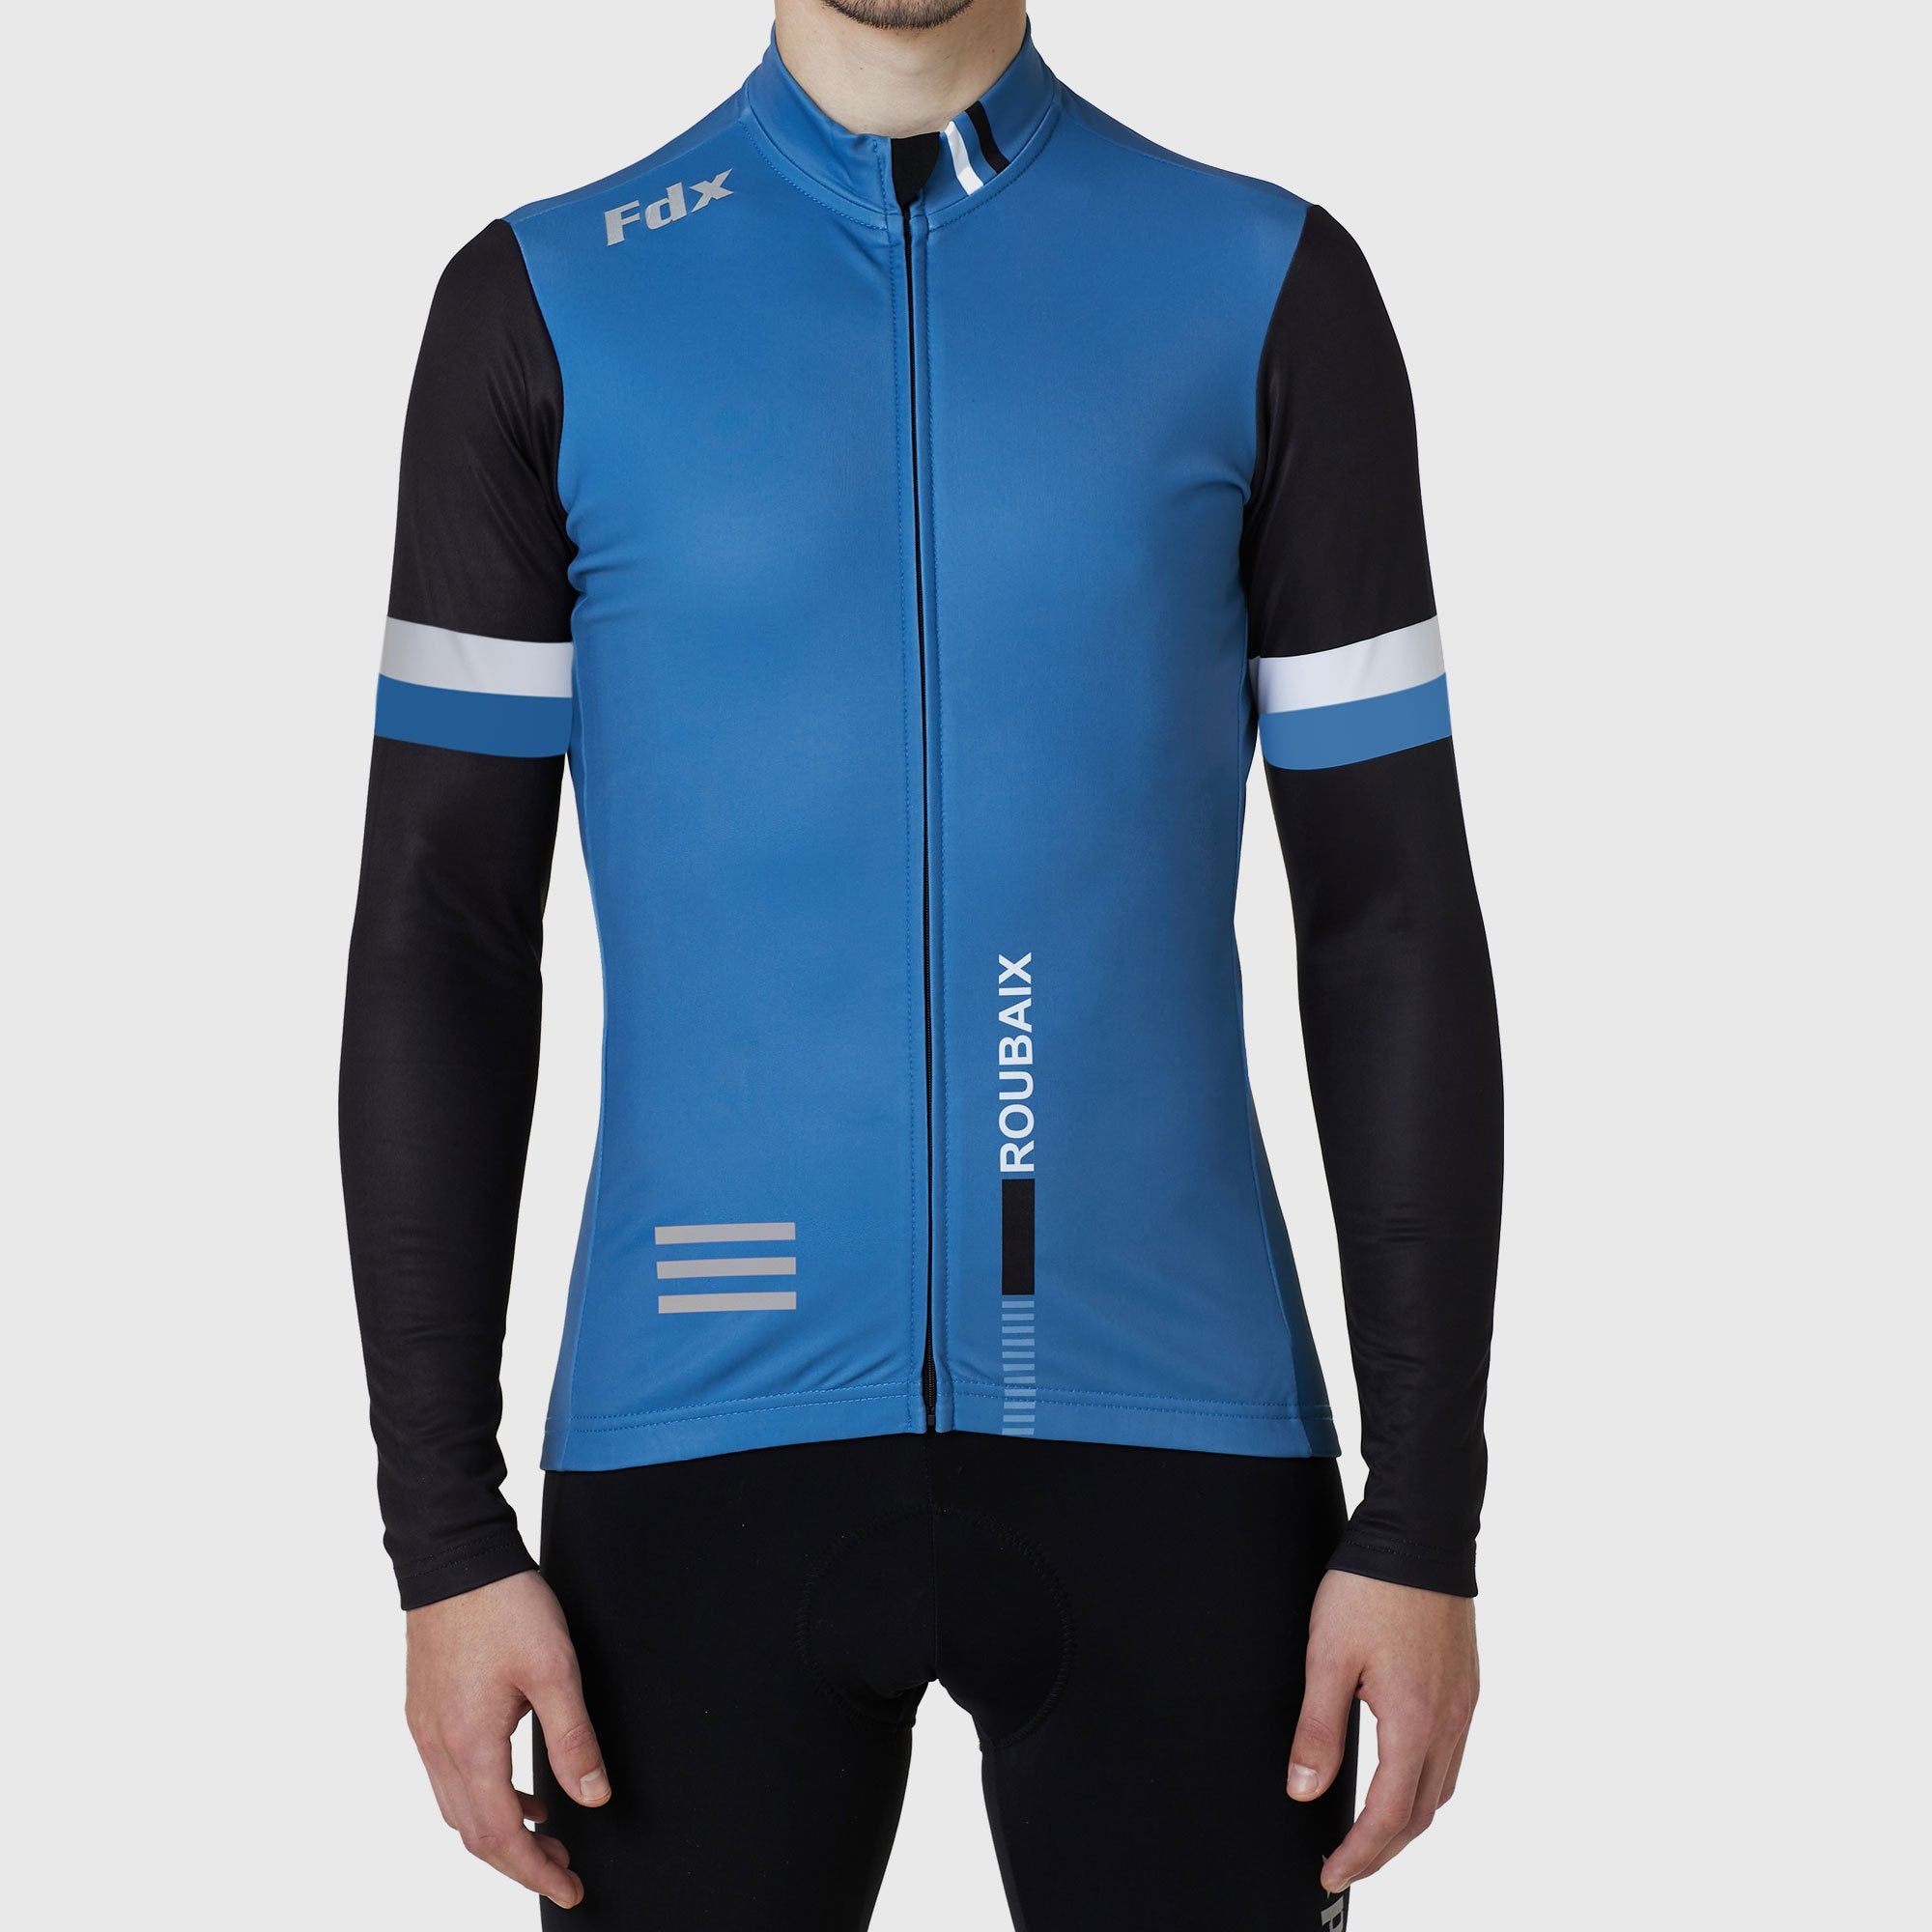 Fdx Limited Edition Blue Men\'s Sports | Long Jersey US Sports® FDX Sleeve Cycling FDX Thermal 